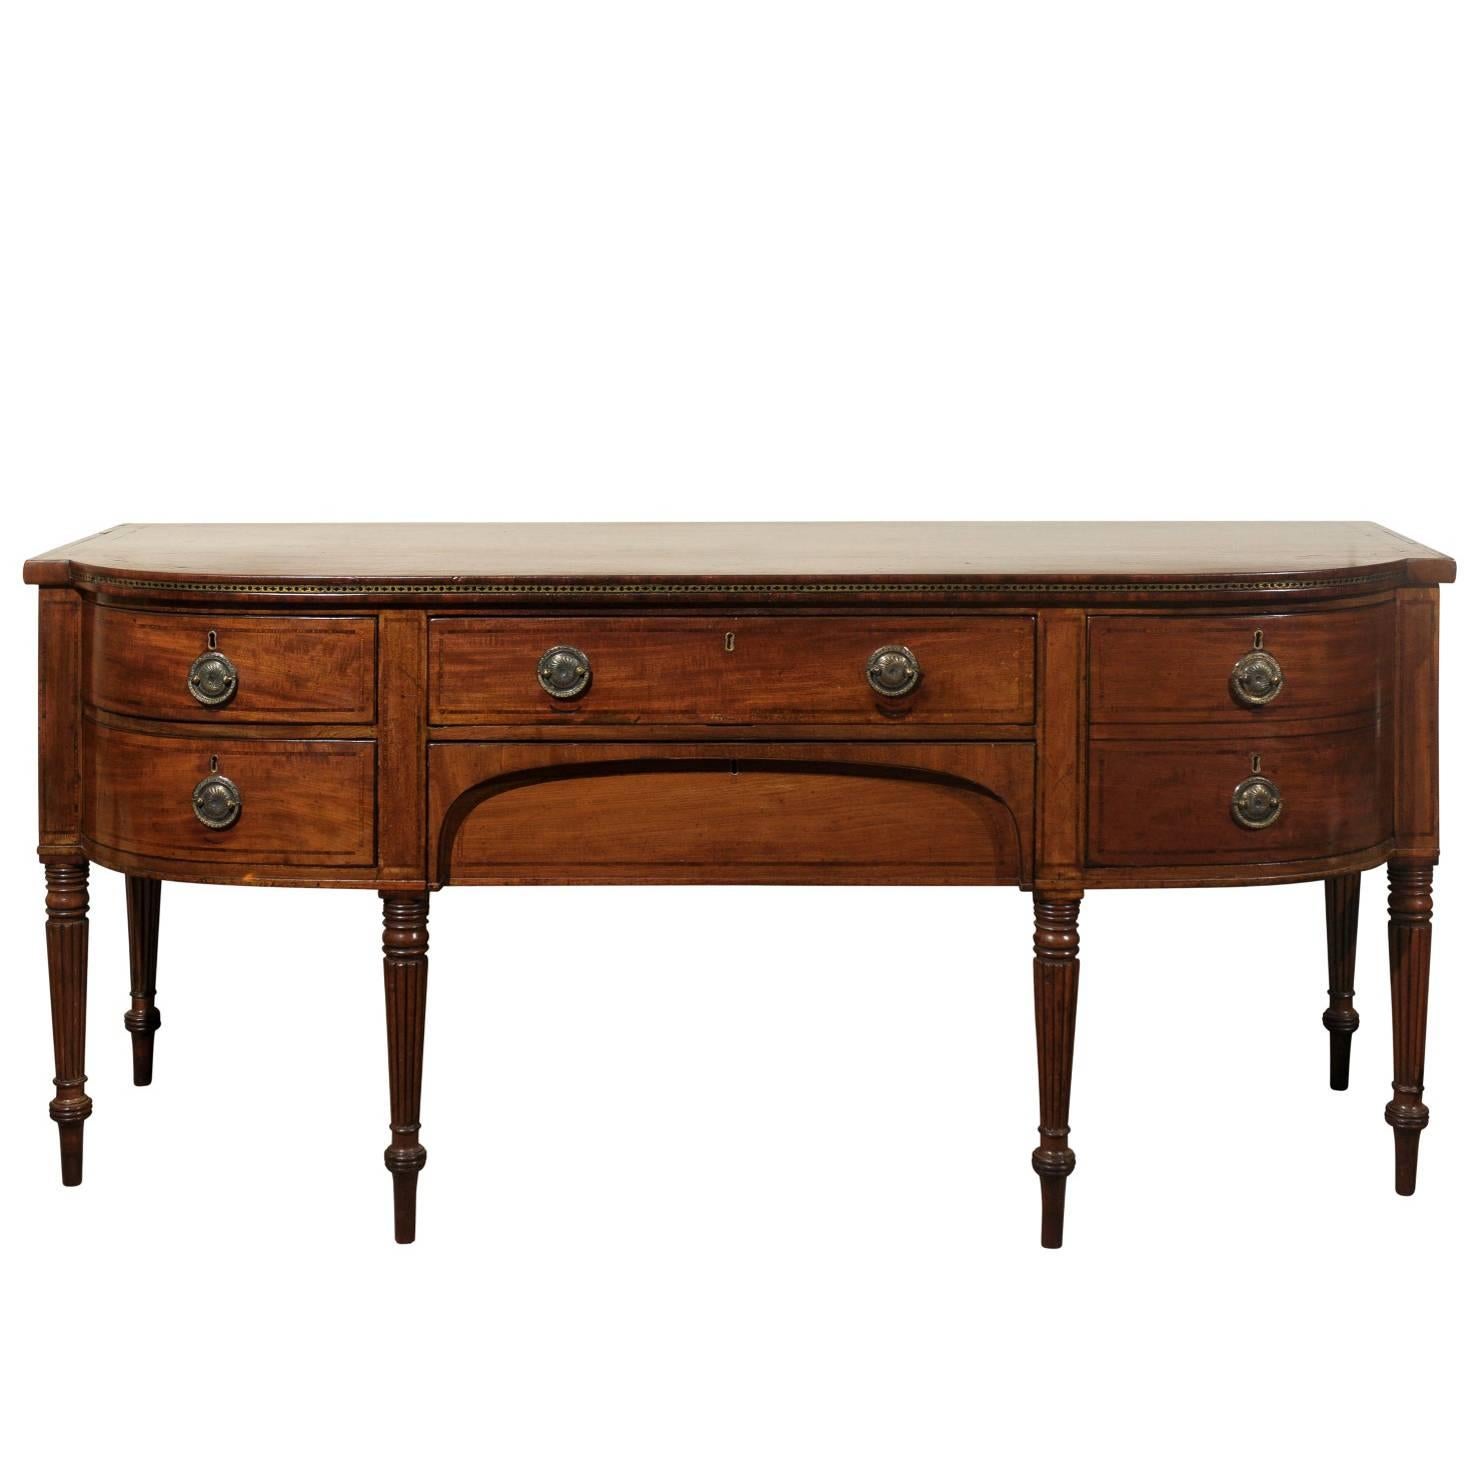 Early 19th Century English Regency Sideboard with Brass Inlay